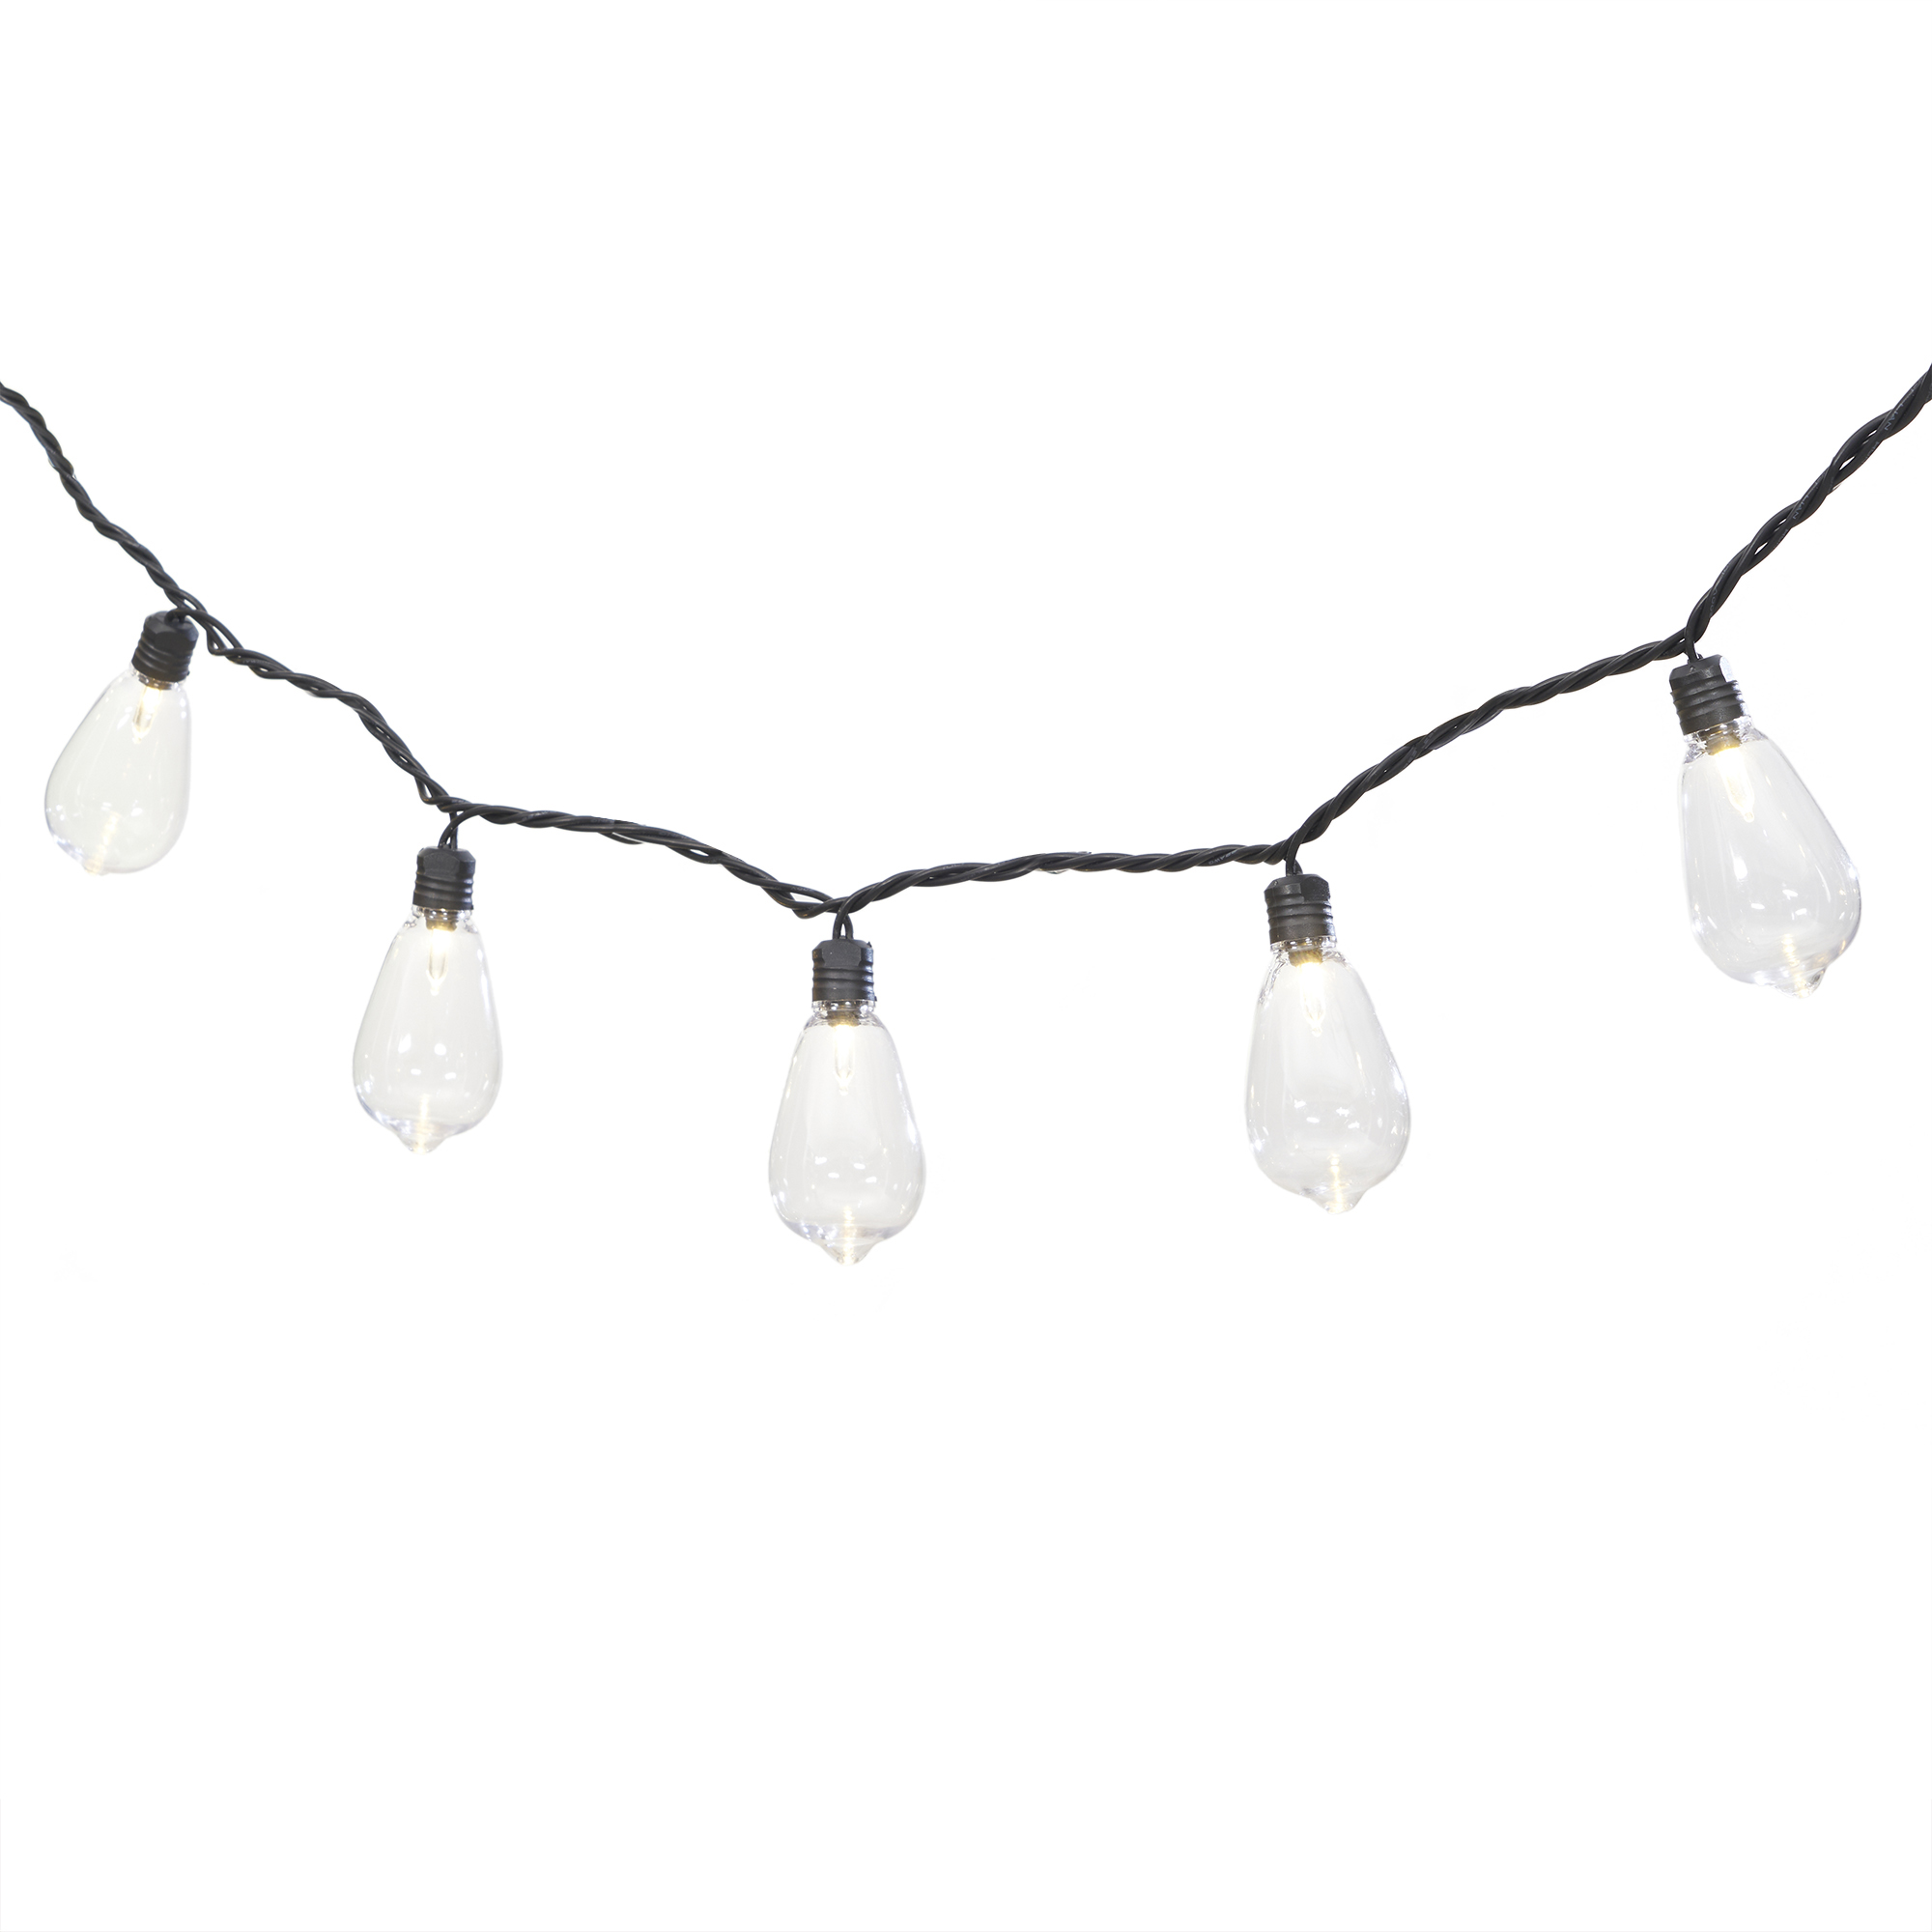 Mainstays 35-Count LED Edison Bulb Outdoor String Lights - image 5 of 9